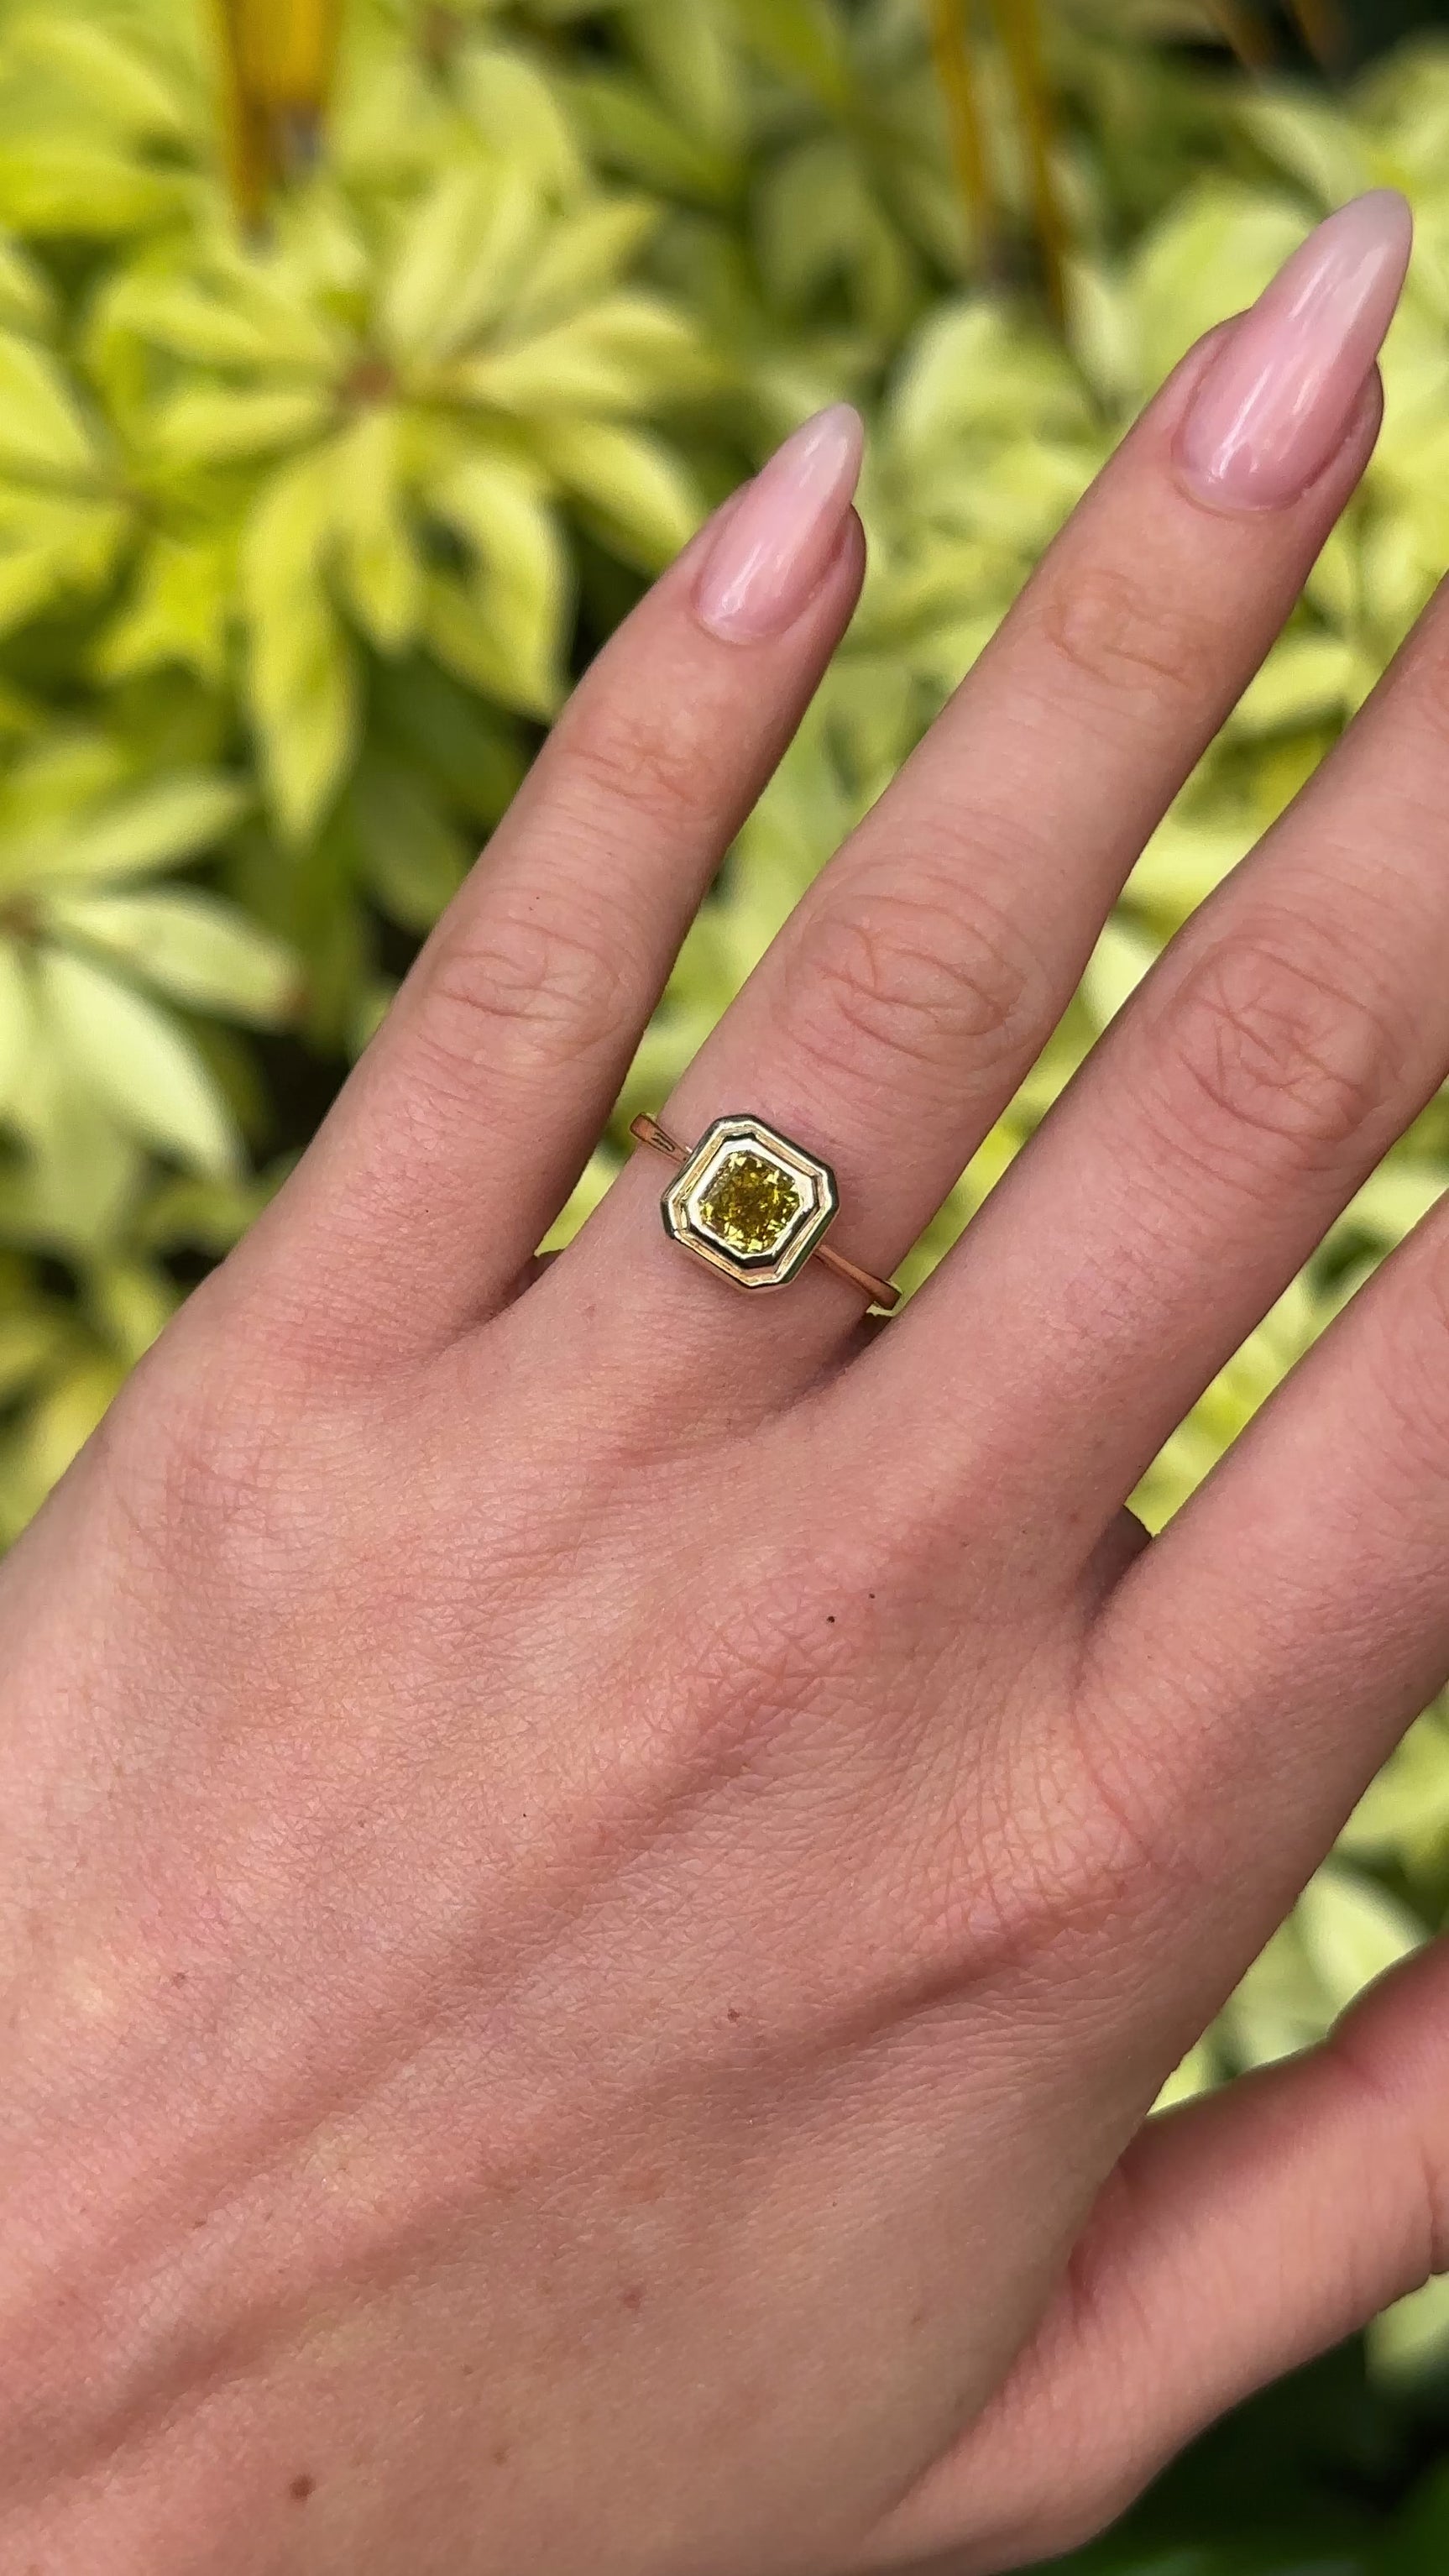 Vintage, Solitaire Yellow Diamond Ring, 14ct Yellow and White Gold worn on hand.